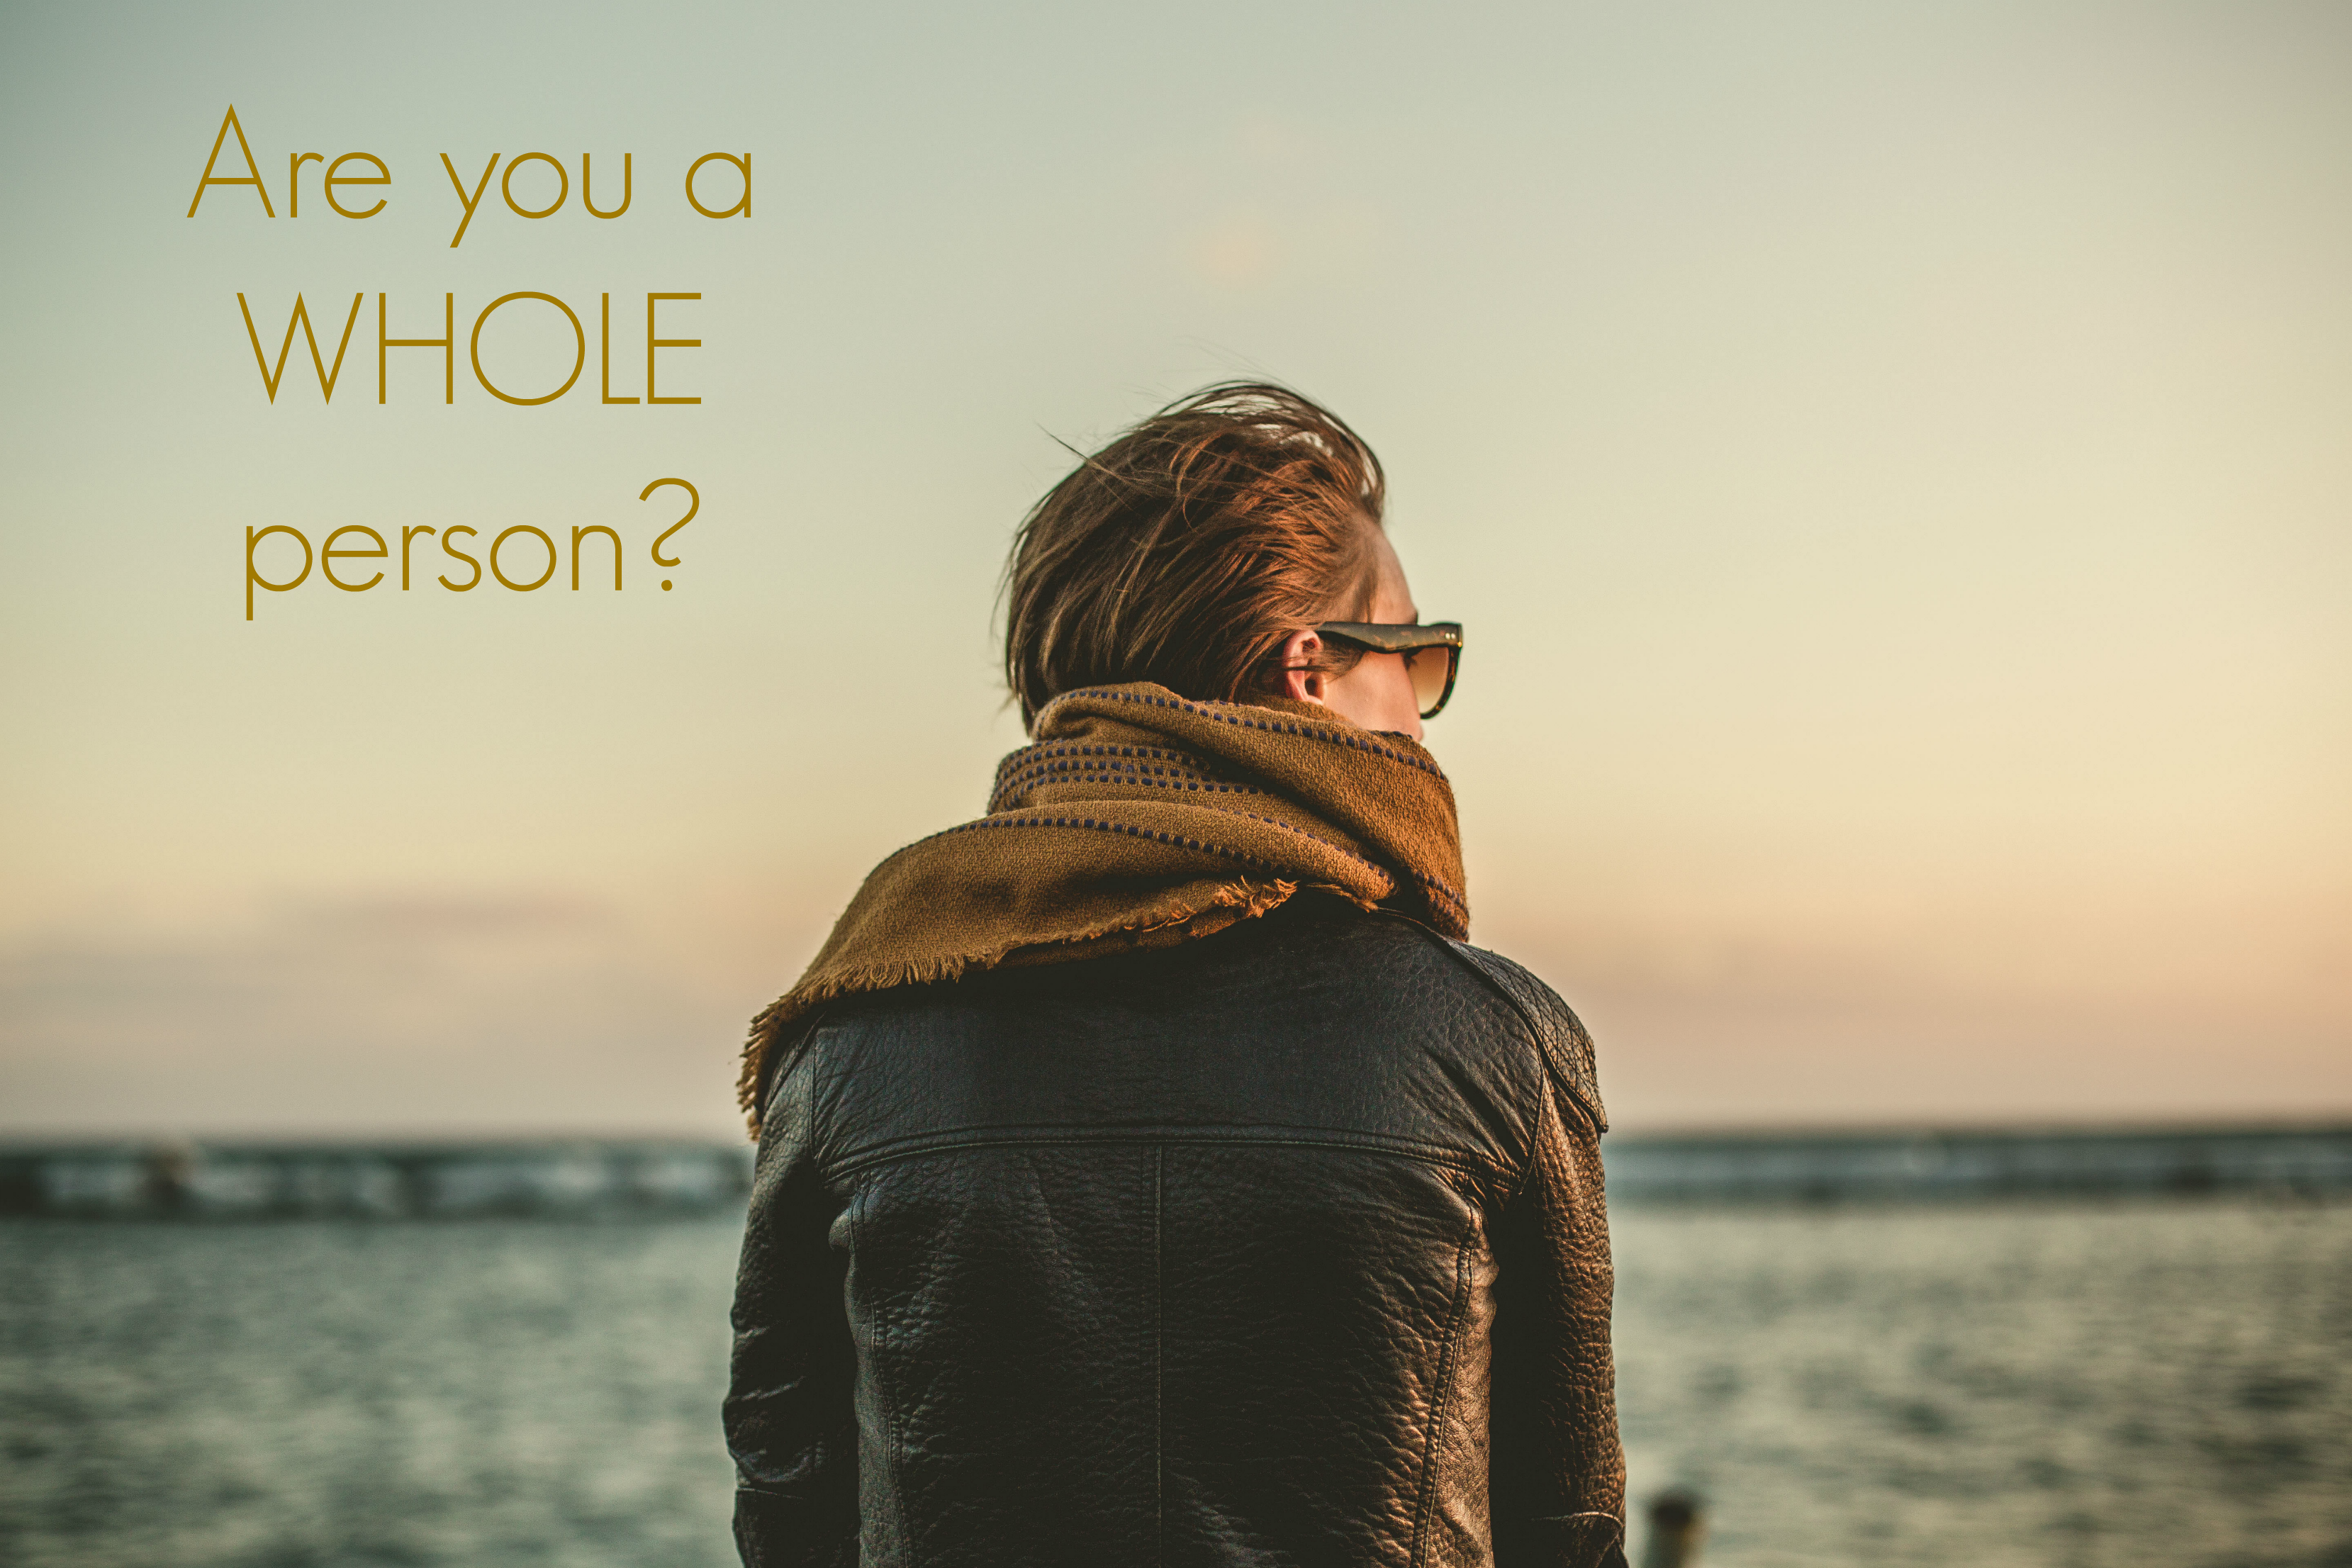 Are you a WHOLE person?